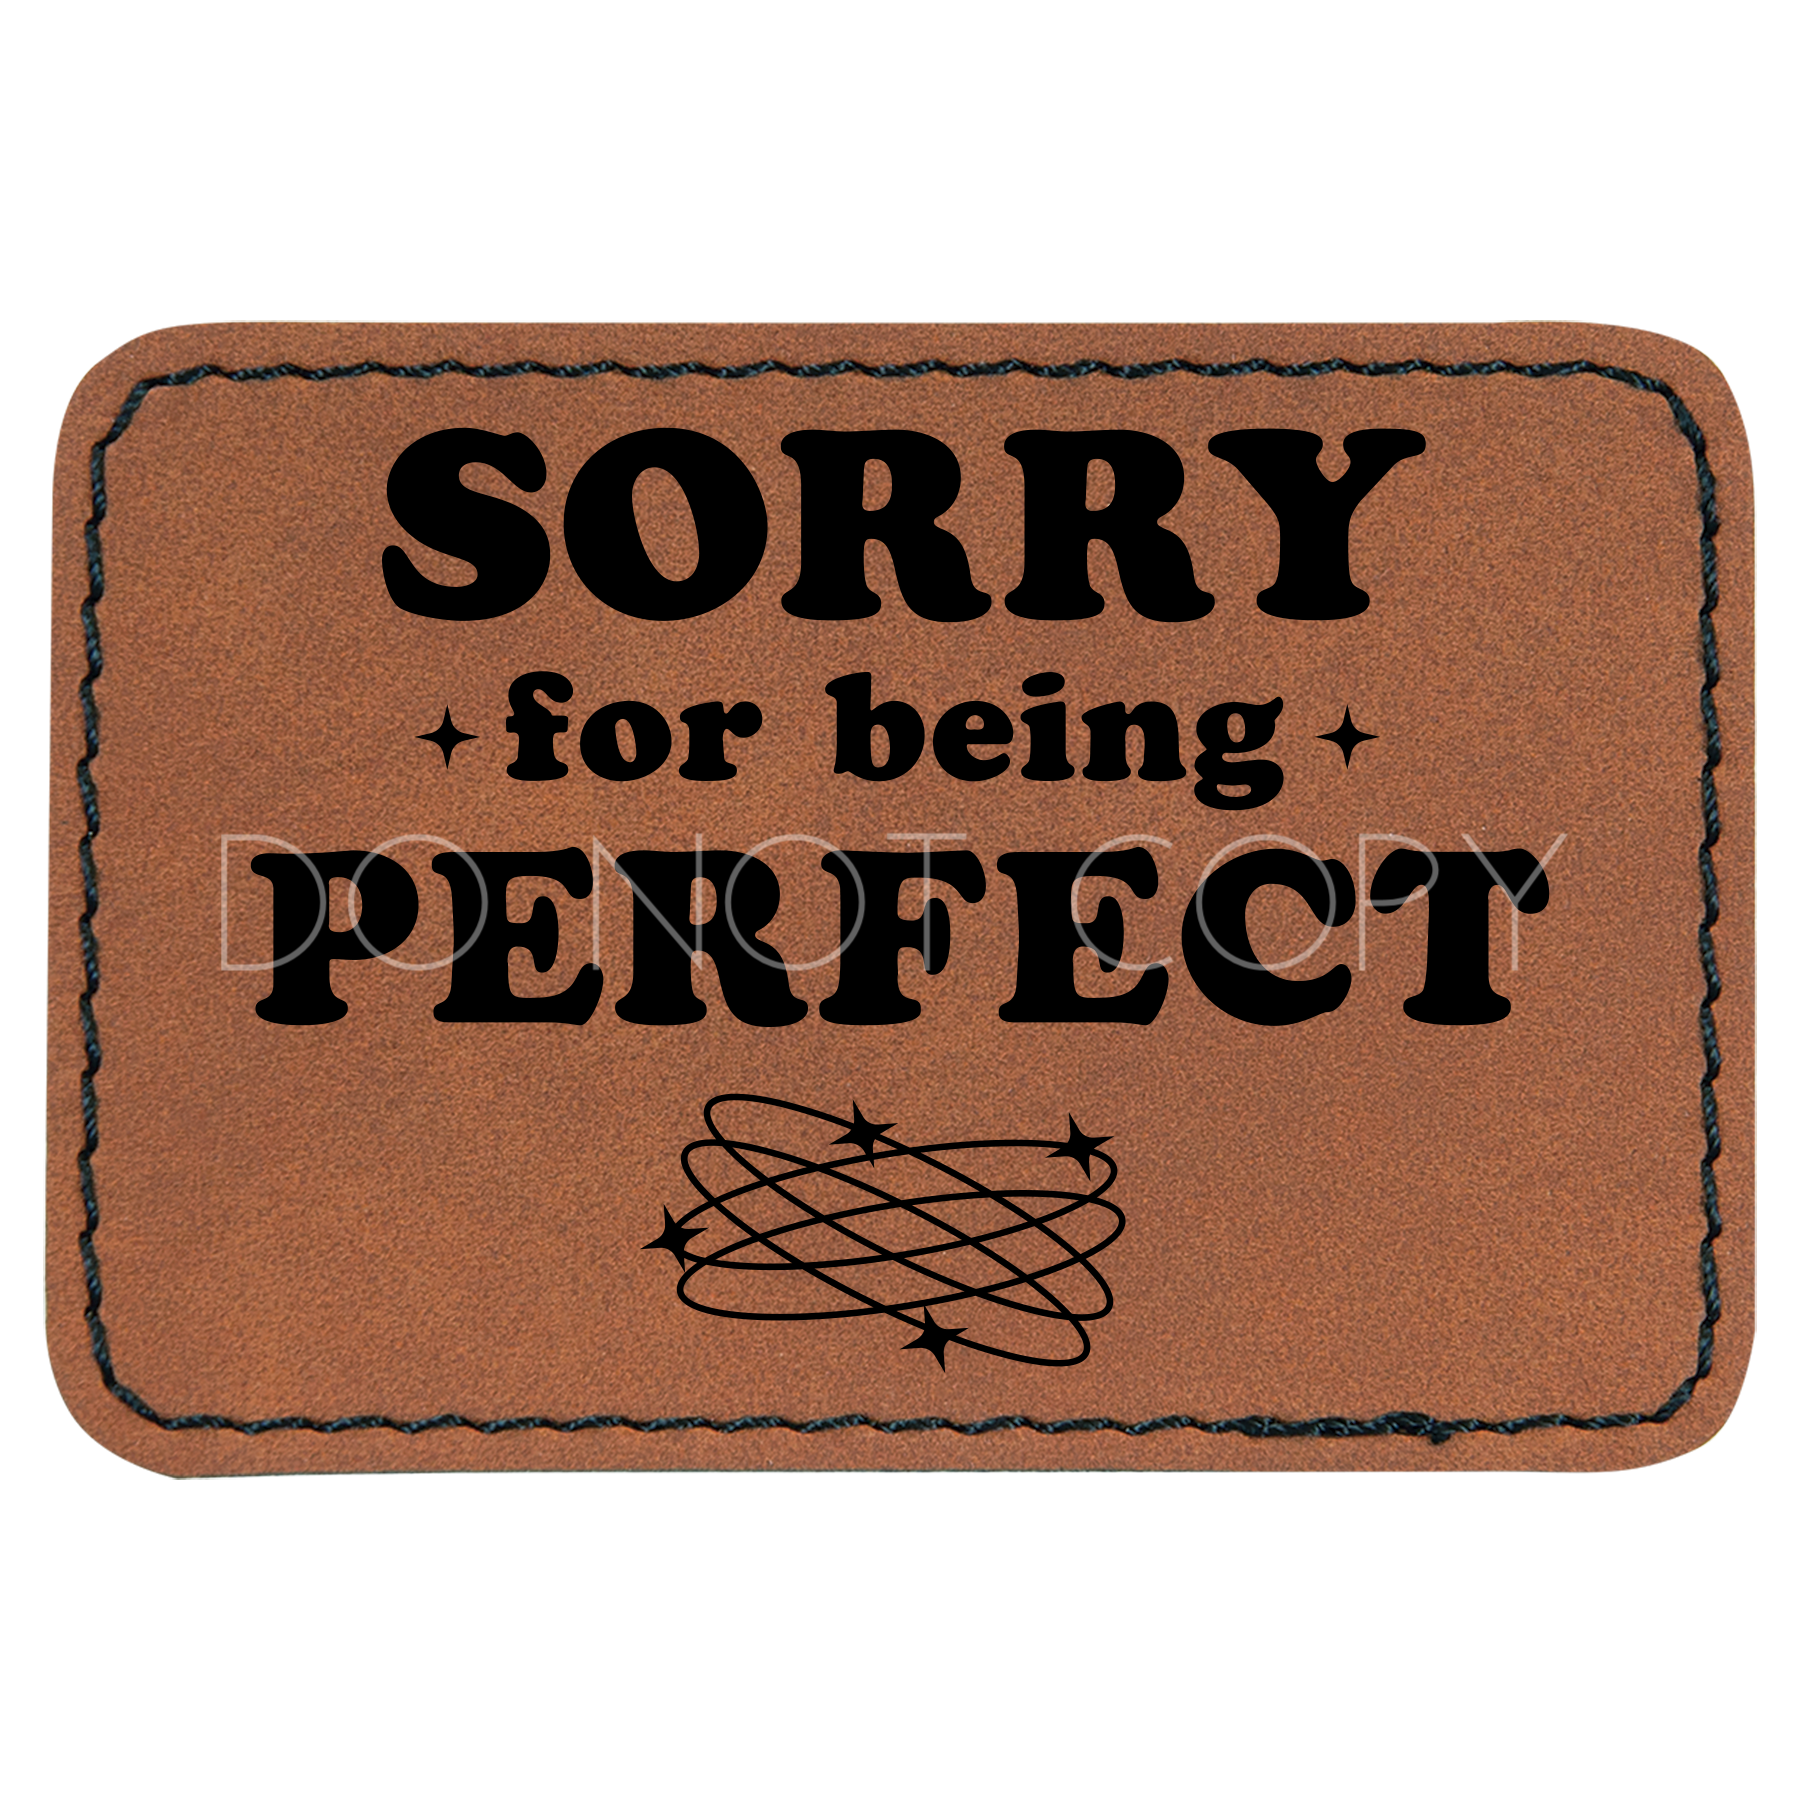 Sorry For Being Perfect Patch